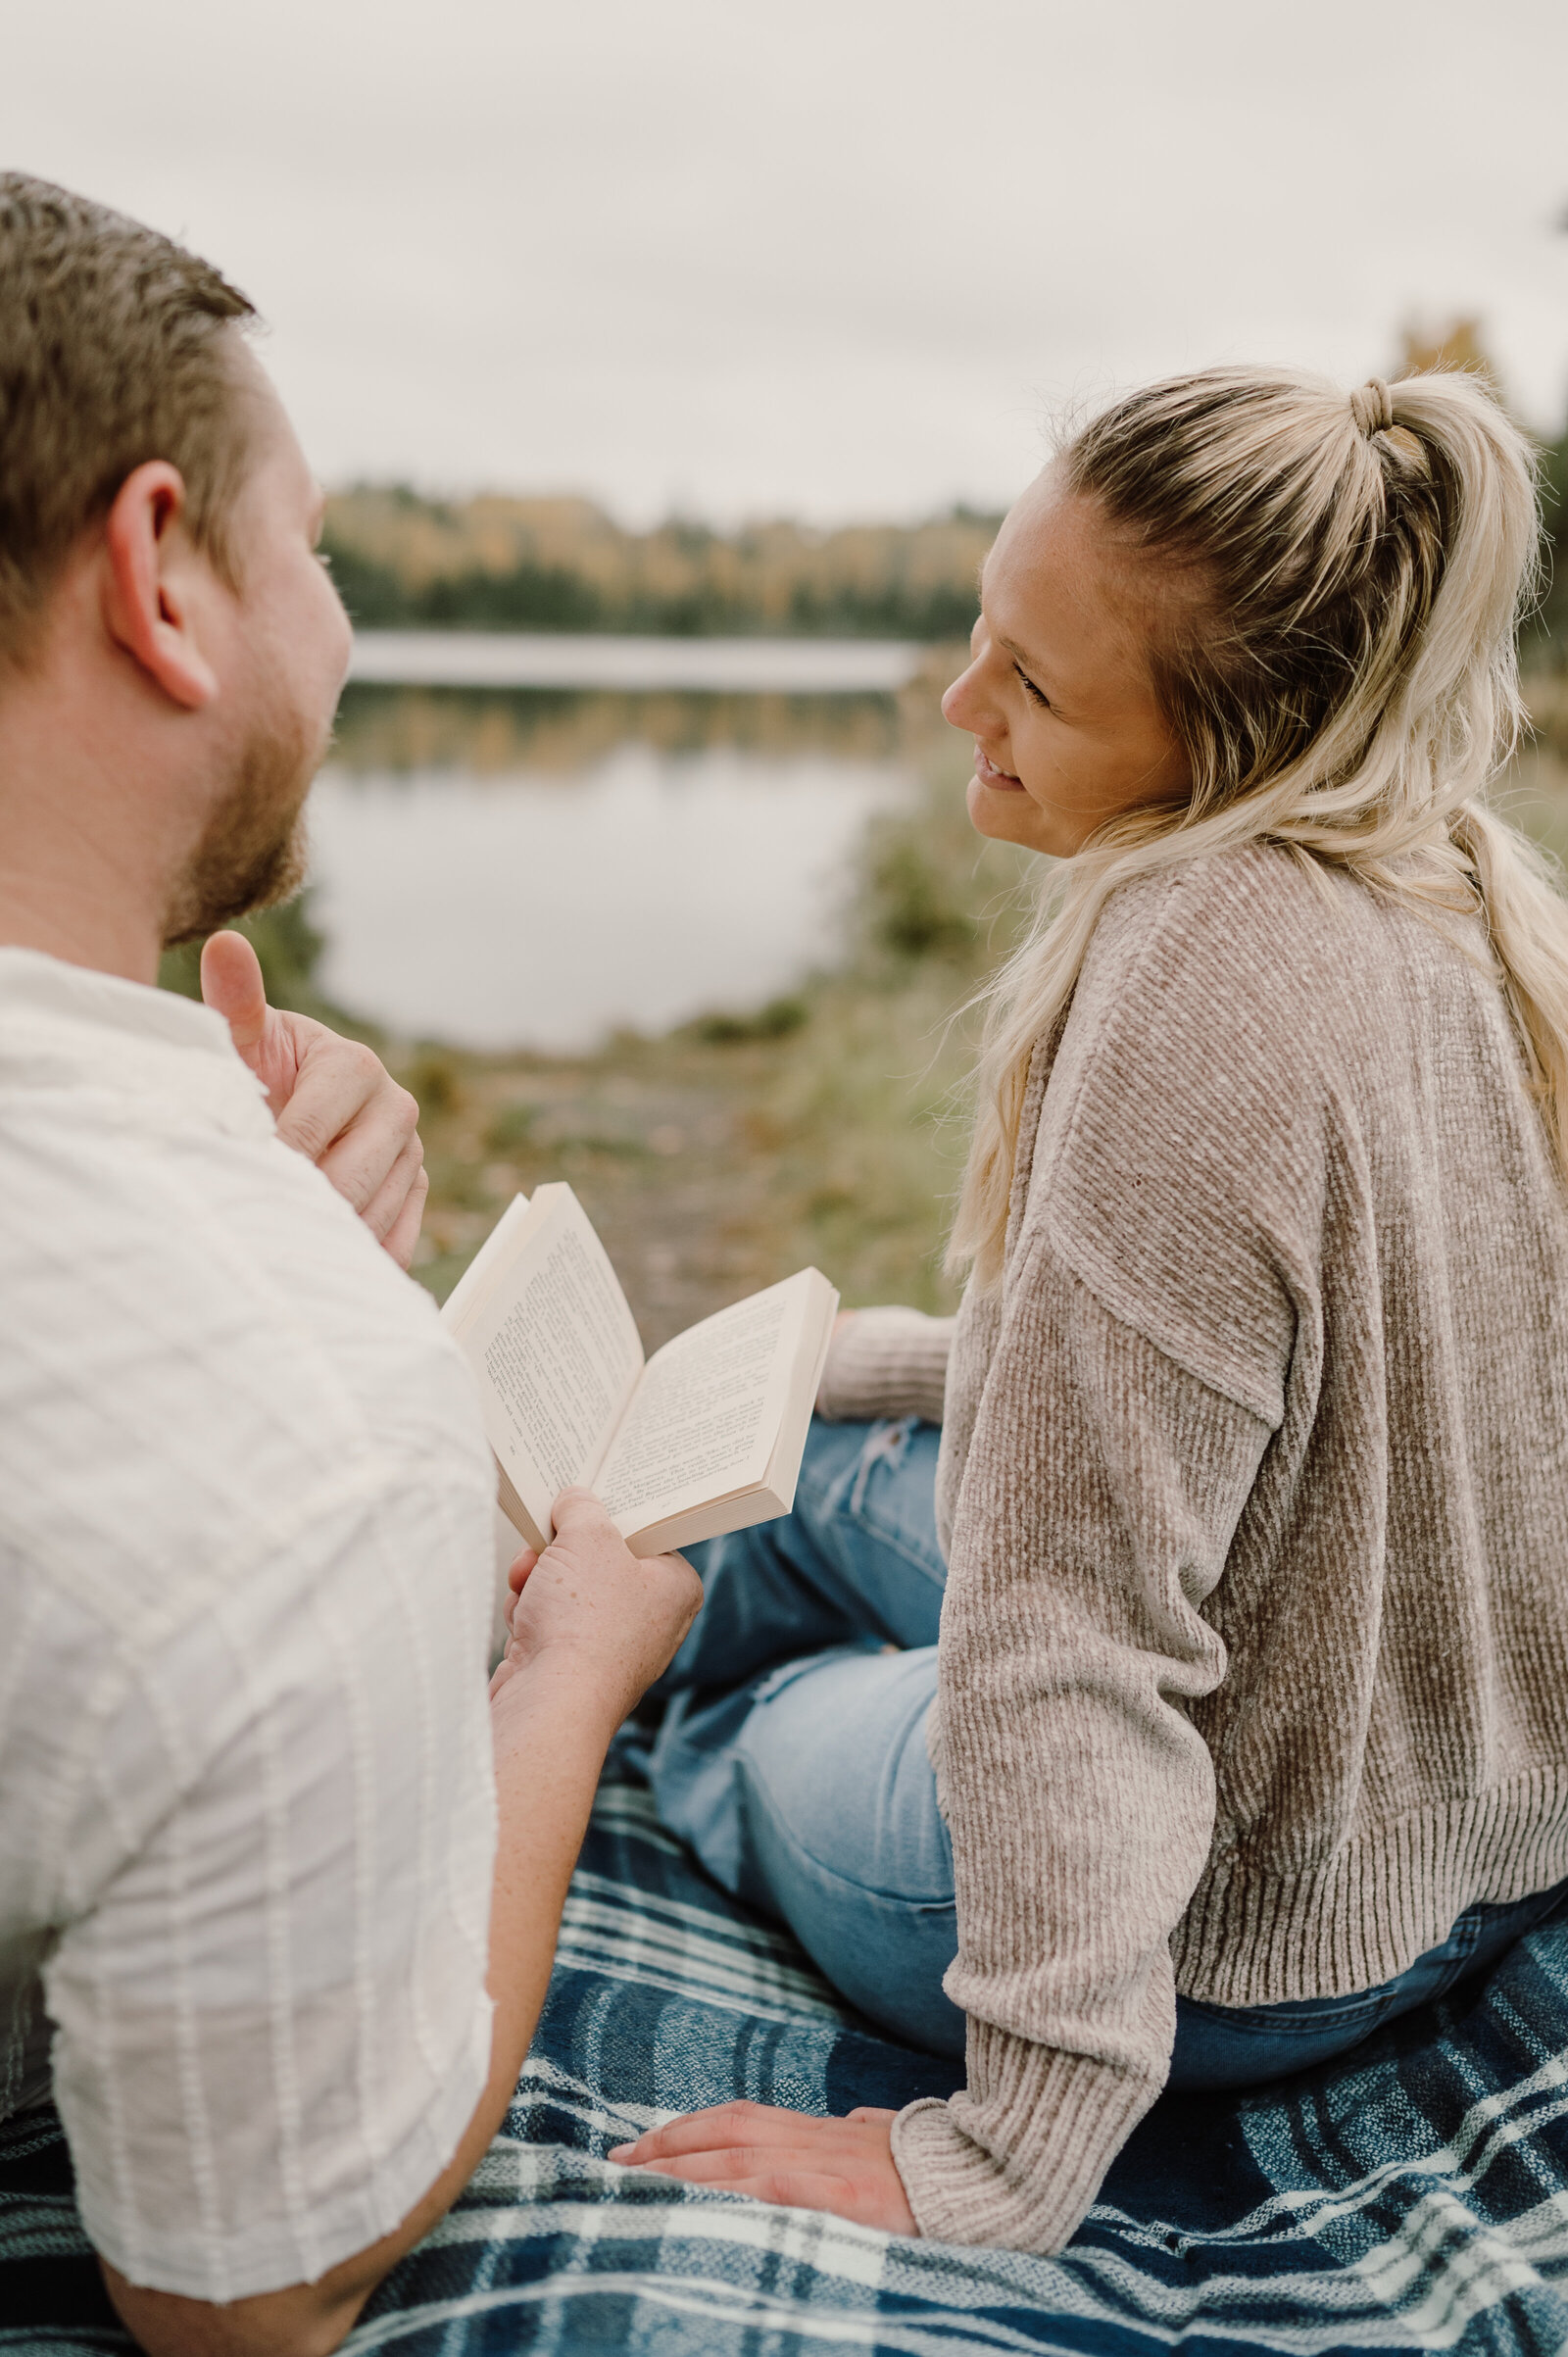 Warm and cozy outfits for fall engagement photos